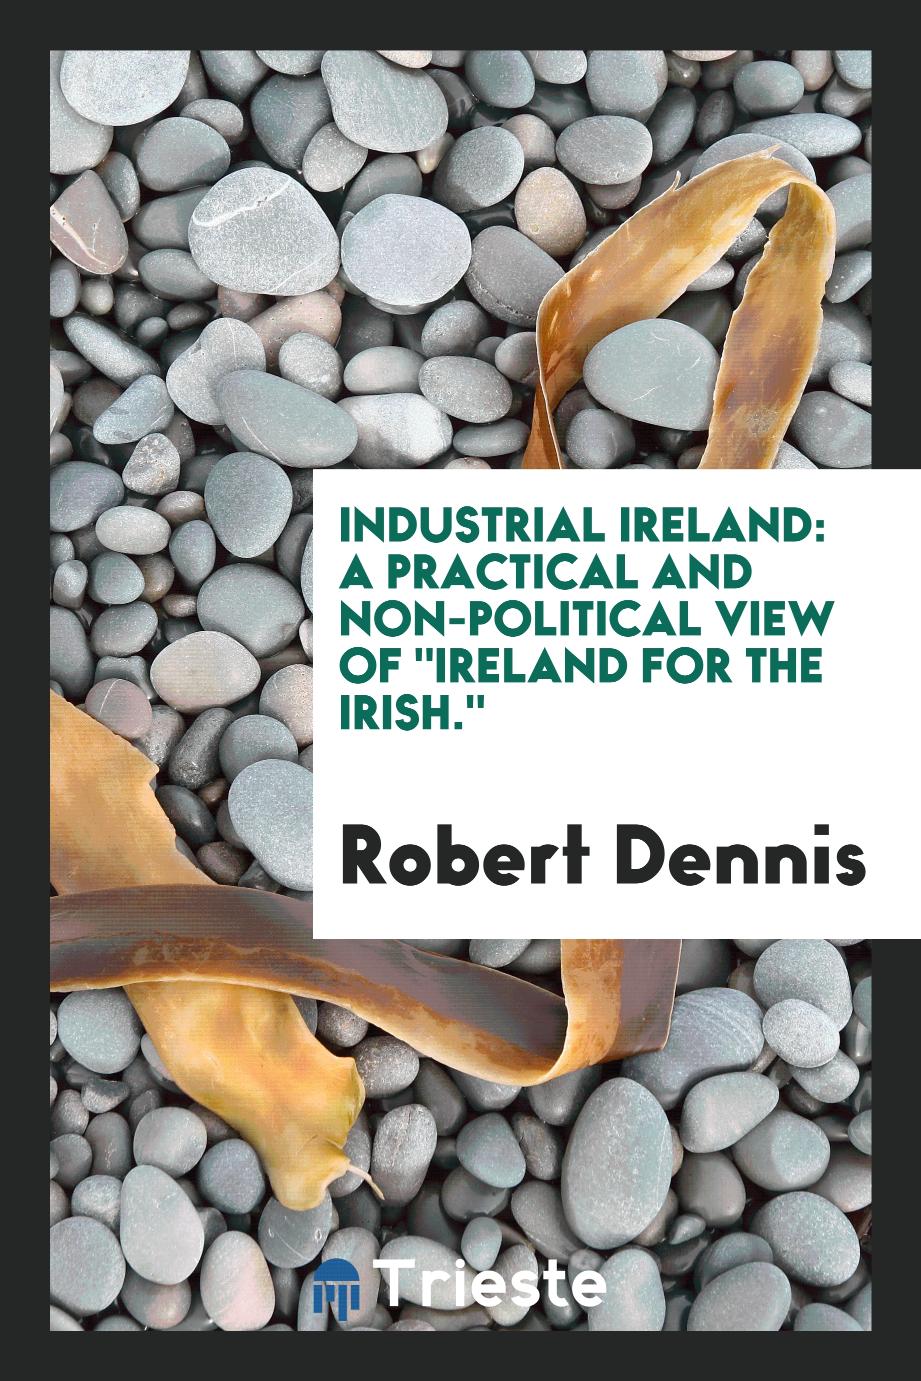 Robert Dennis - Industrial Ireland: a practical and non-political view of "Ireland for the Irish."